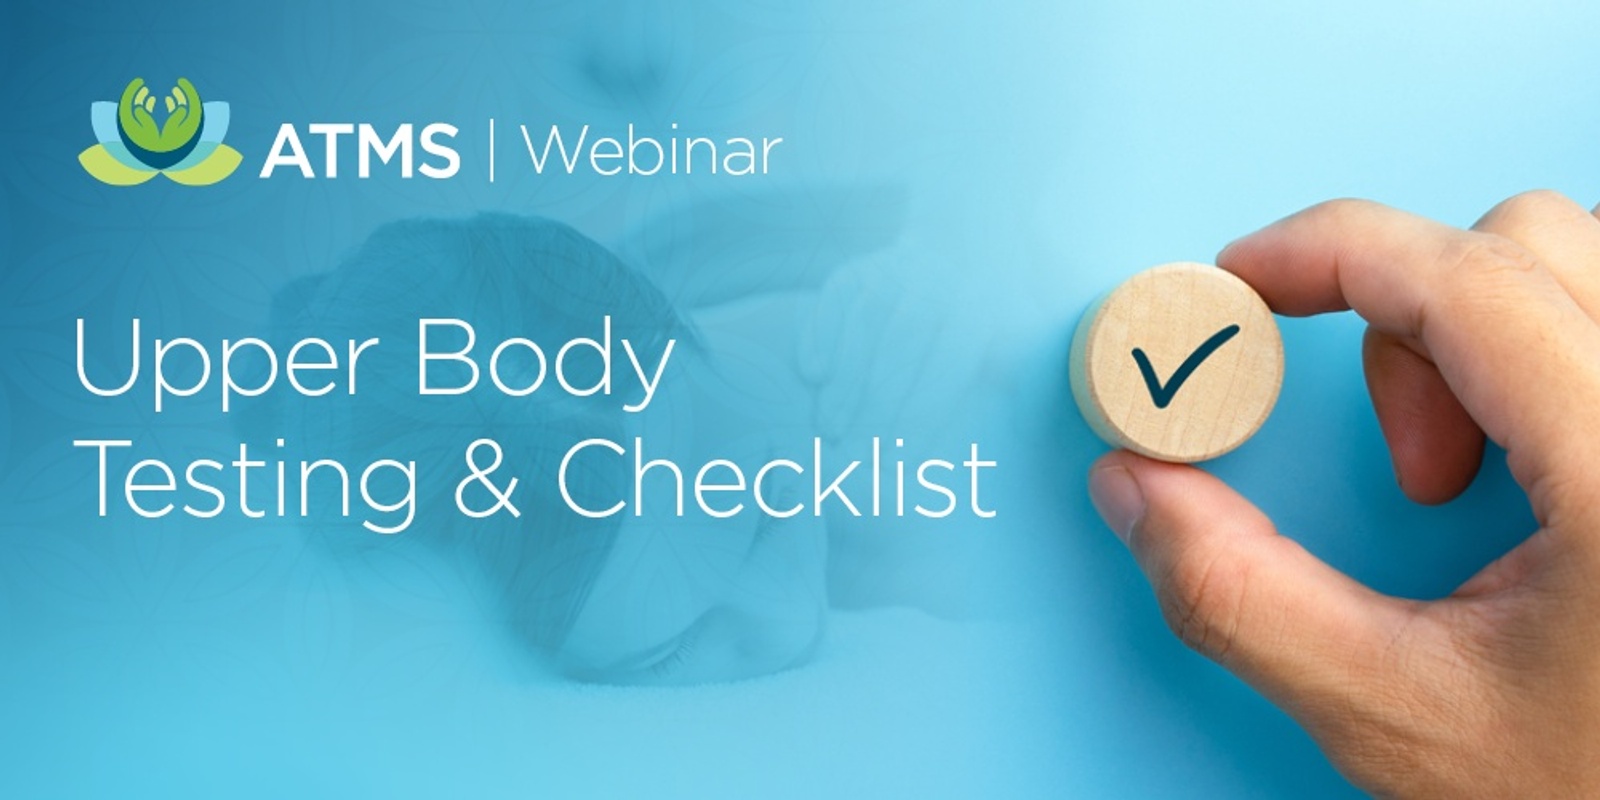 Webinar Recording: Testing & Checklists for bodyworkers- The Upper Body